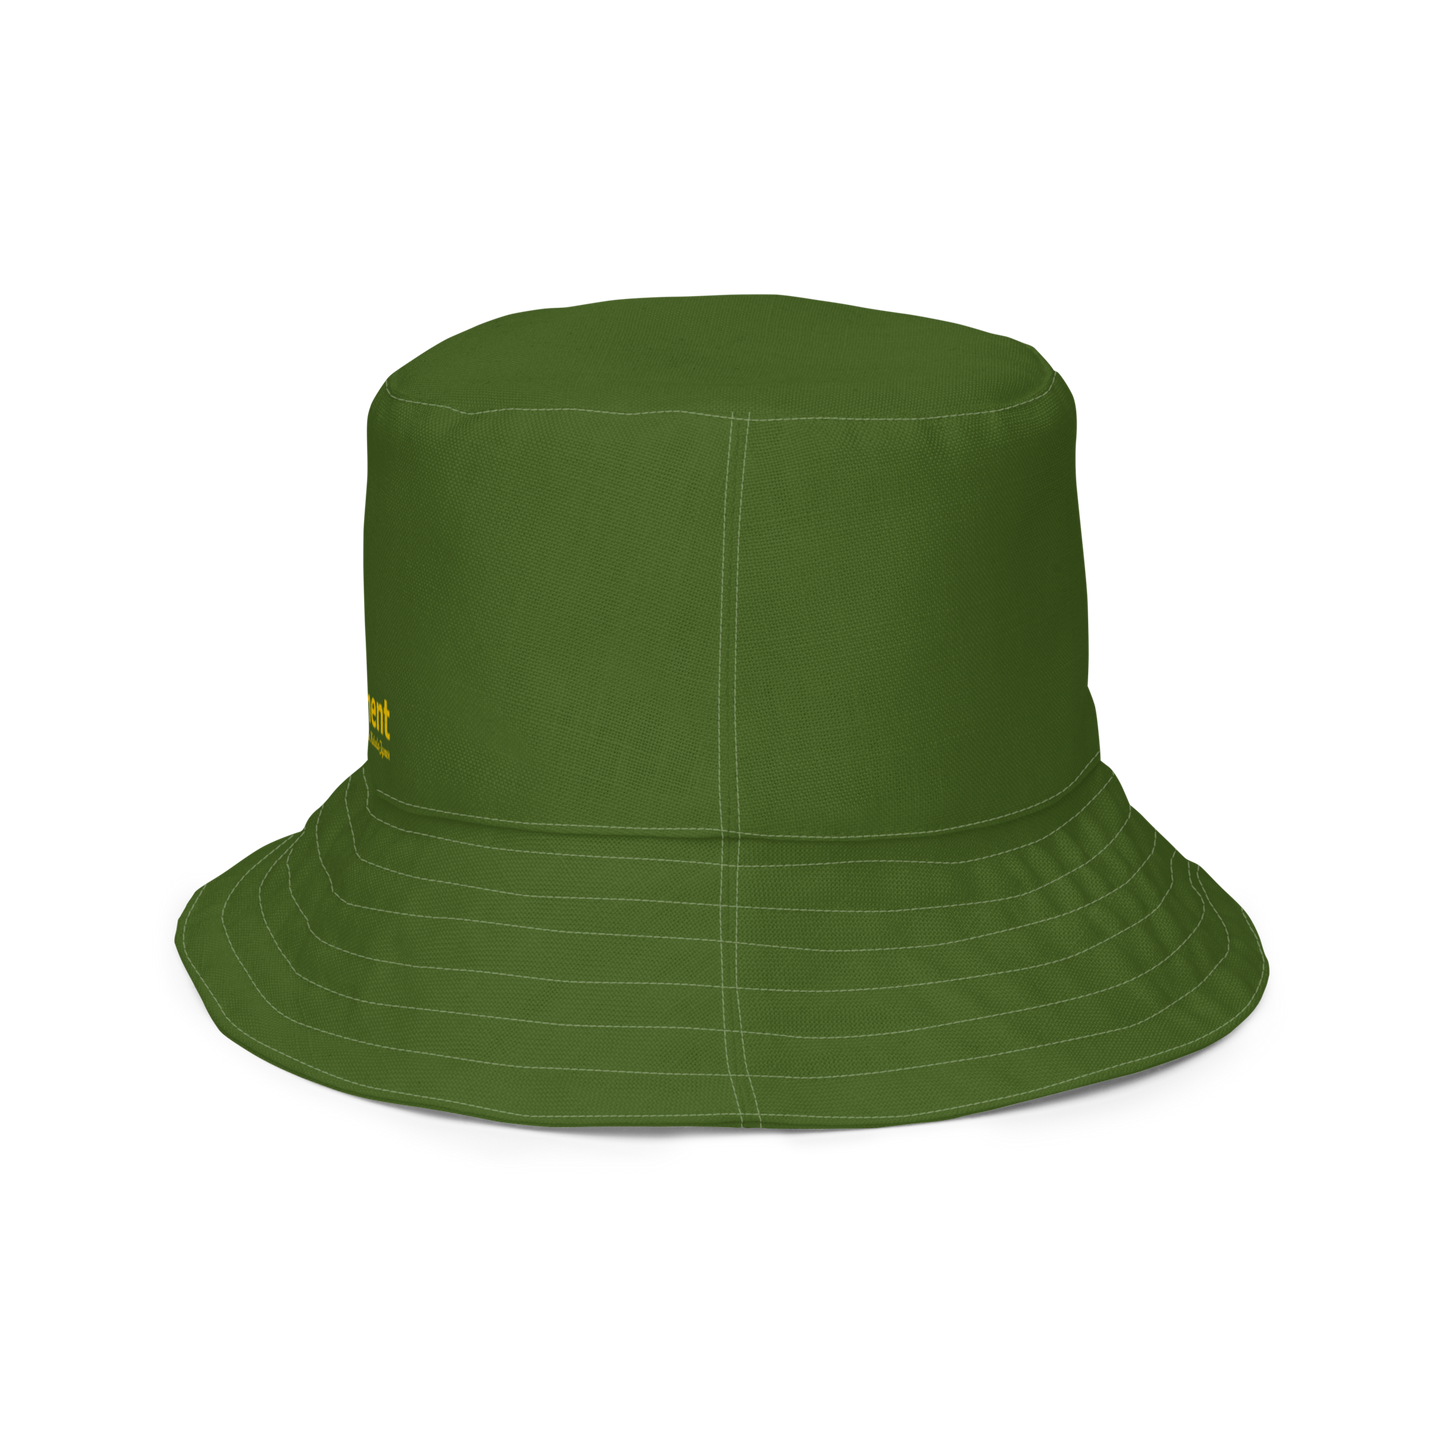 The FLOWER LOVE Collection - "Butterfly Beauty" Design Premium Reversible Bucket Hat - Dark Green Inside - Beach Hat, Gifts for Her